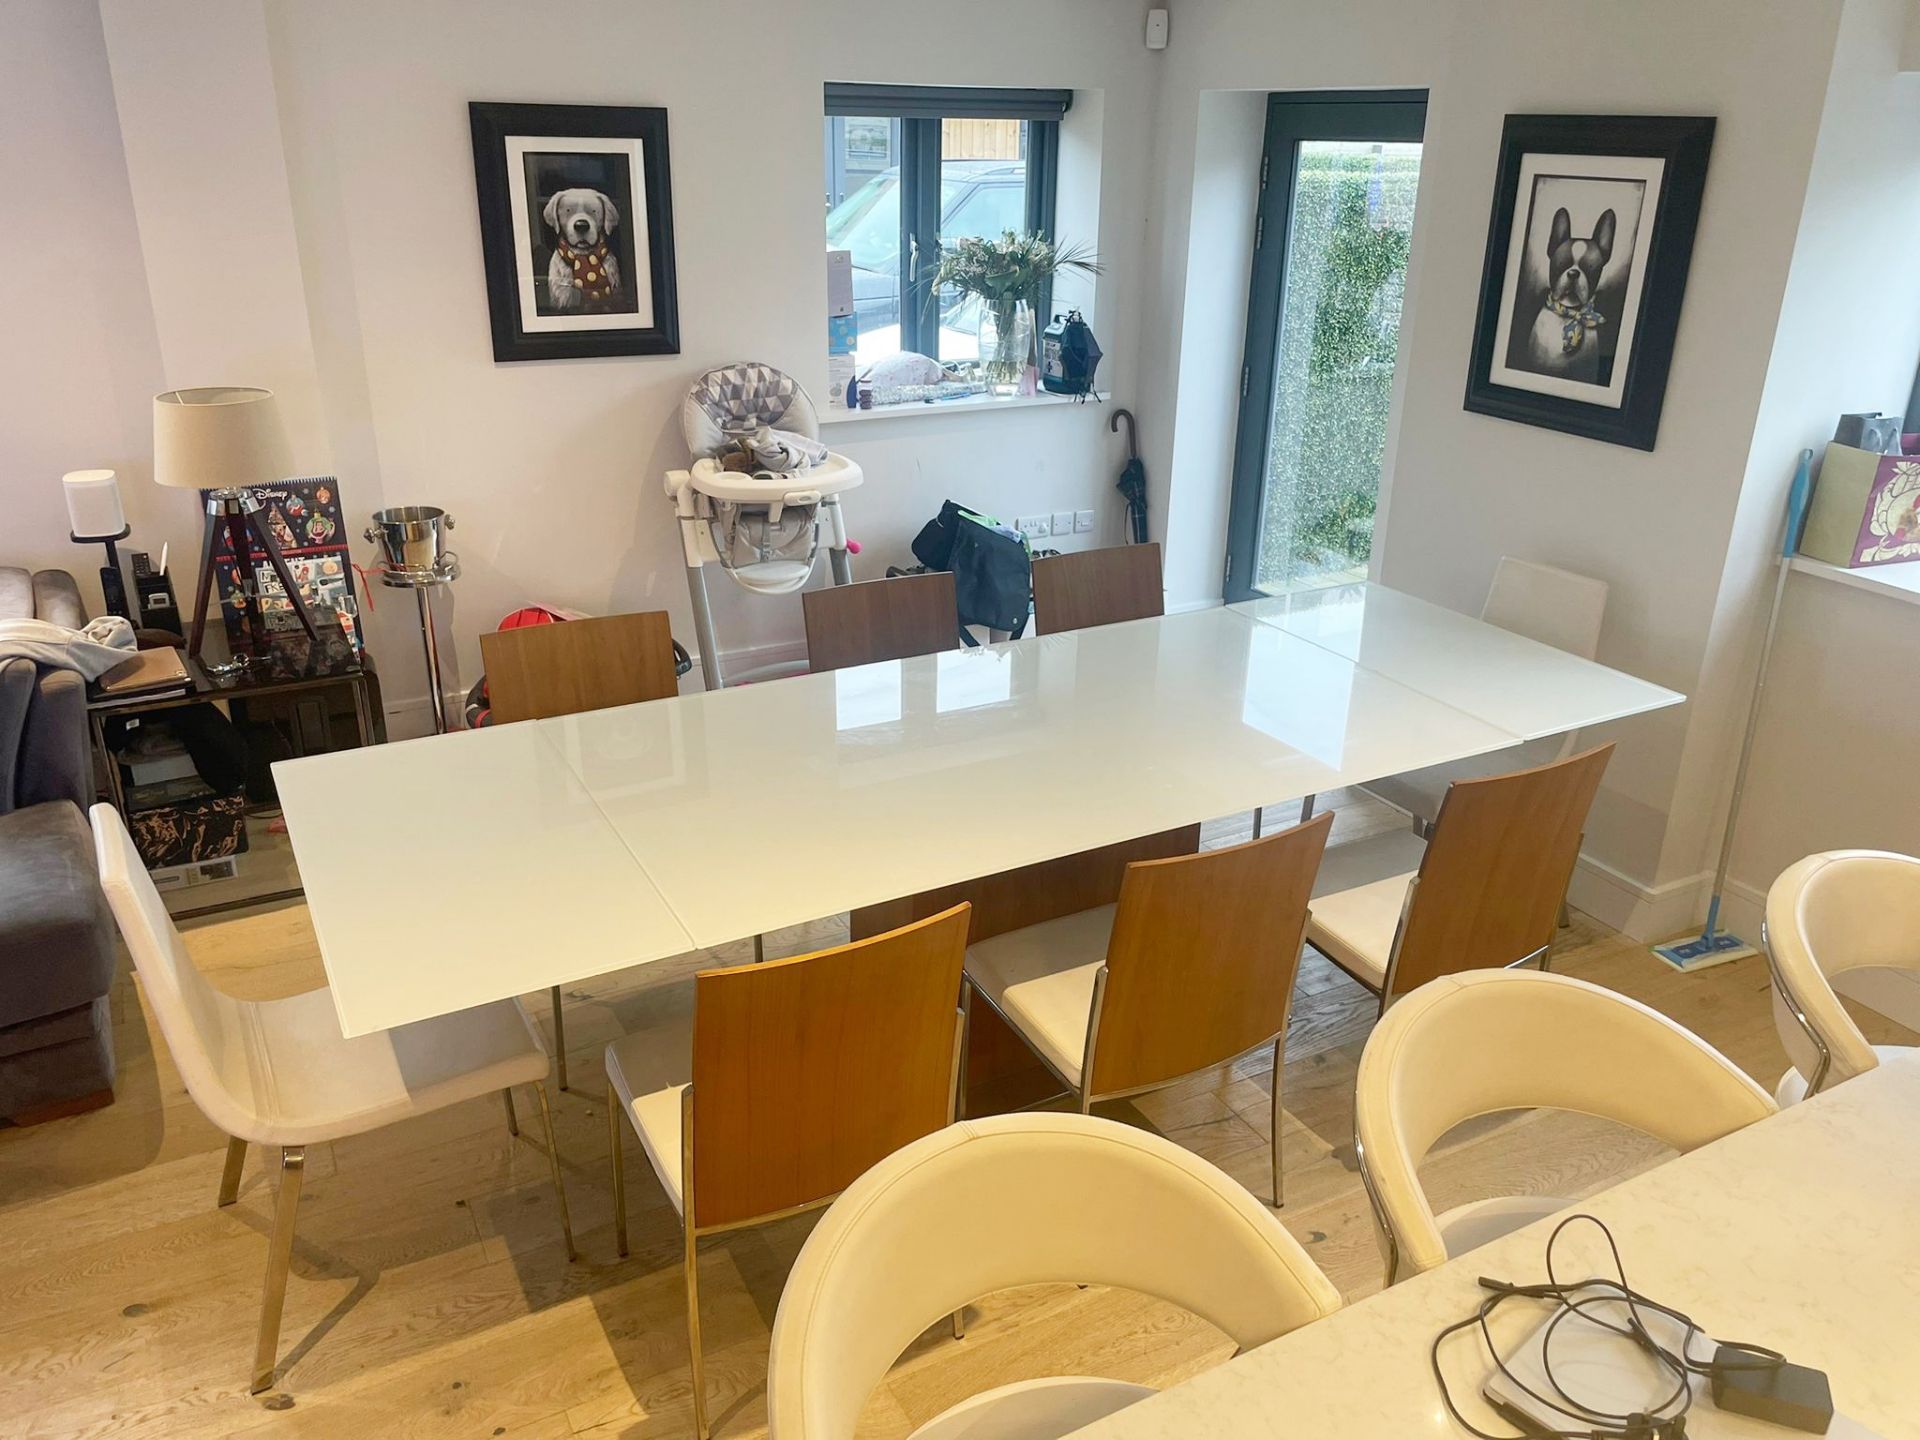 1 x CALLIGARIS 2.8 Metre Italian Glass-topped Extending Dining Table With 8 x Calligaris Chairs - Image 4 of 8